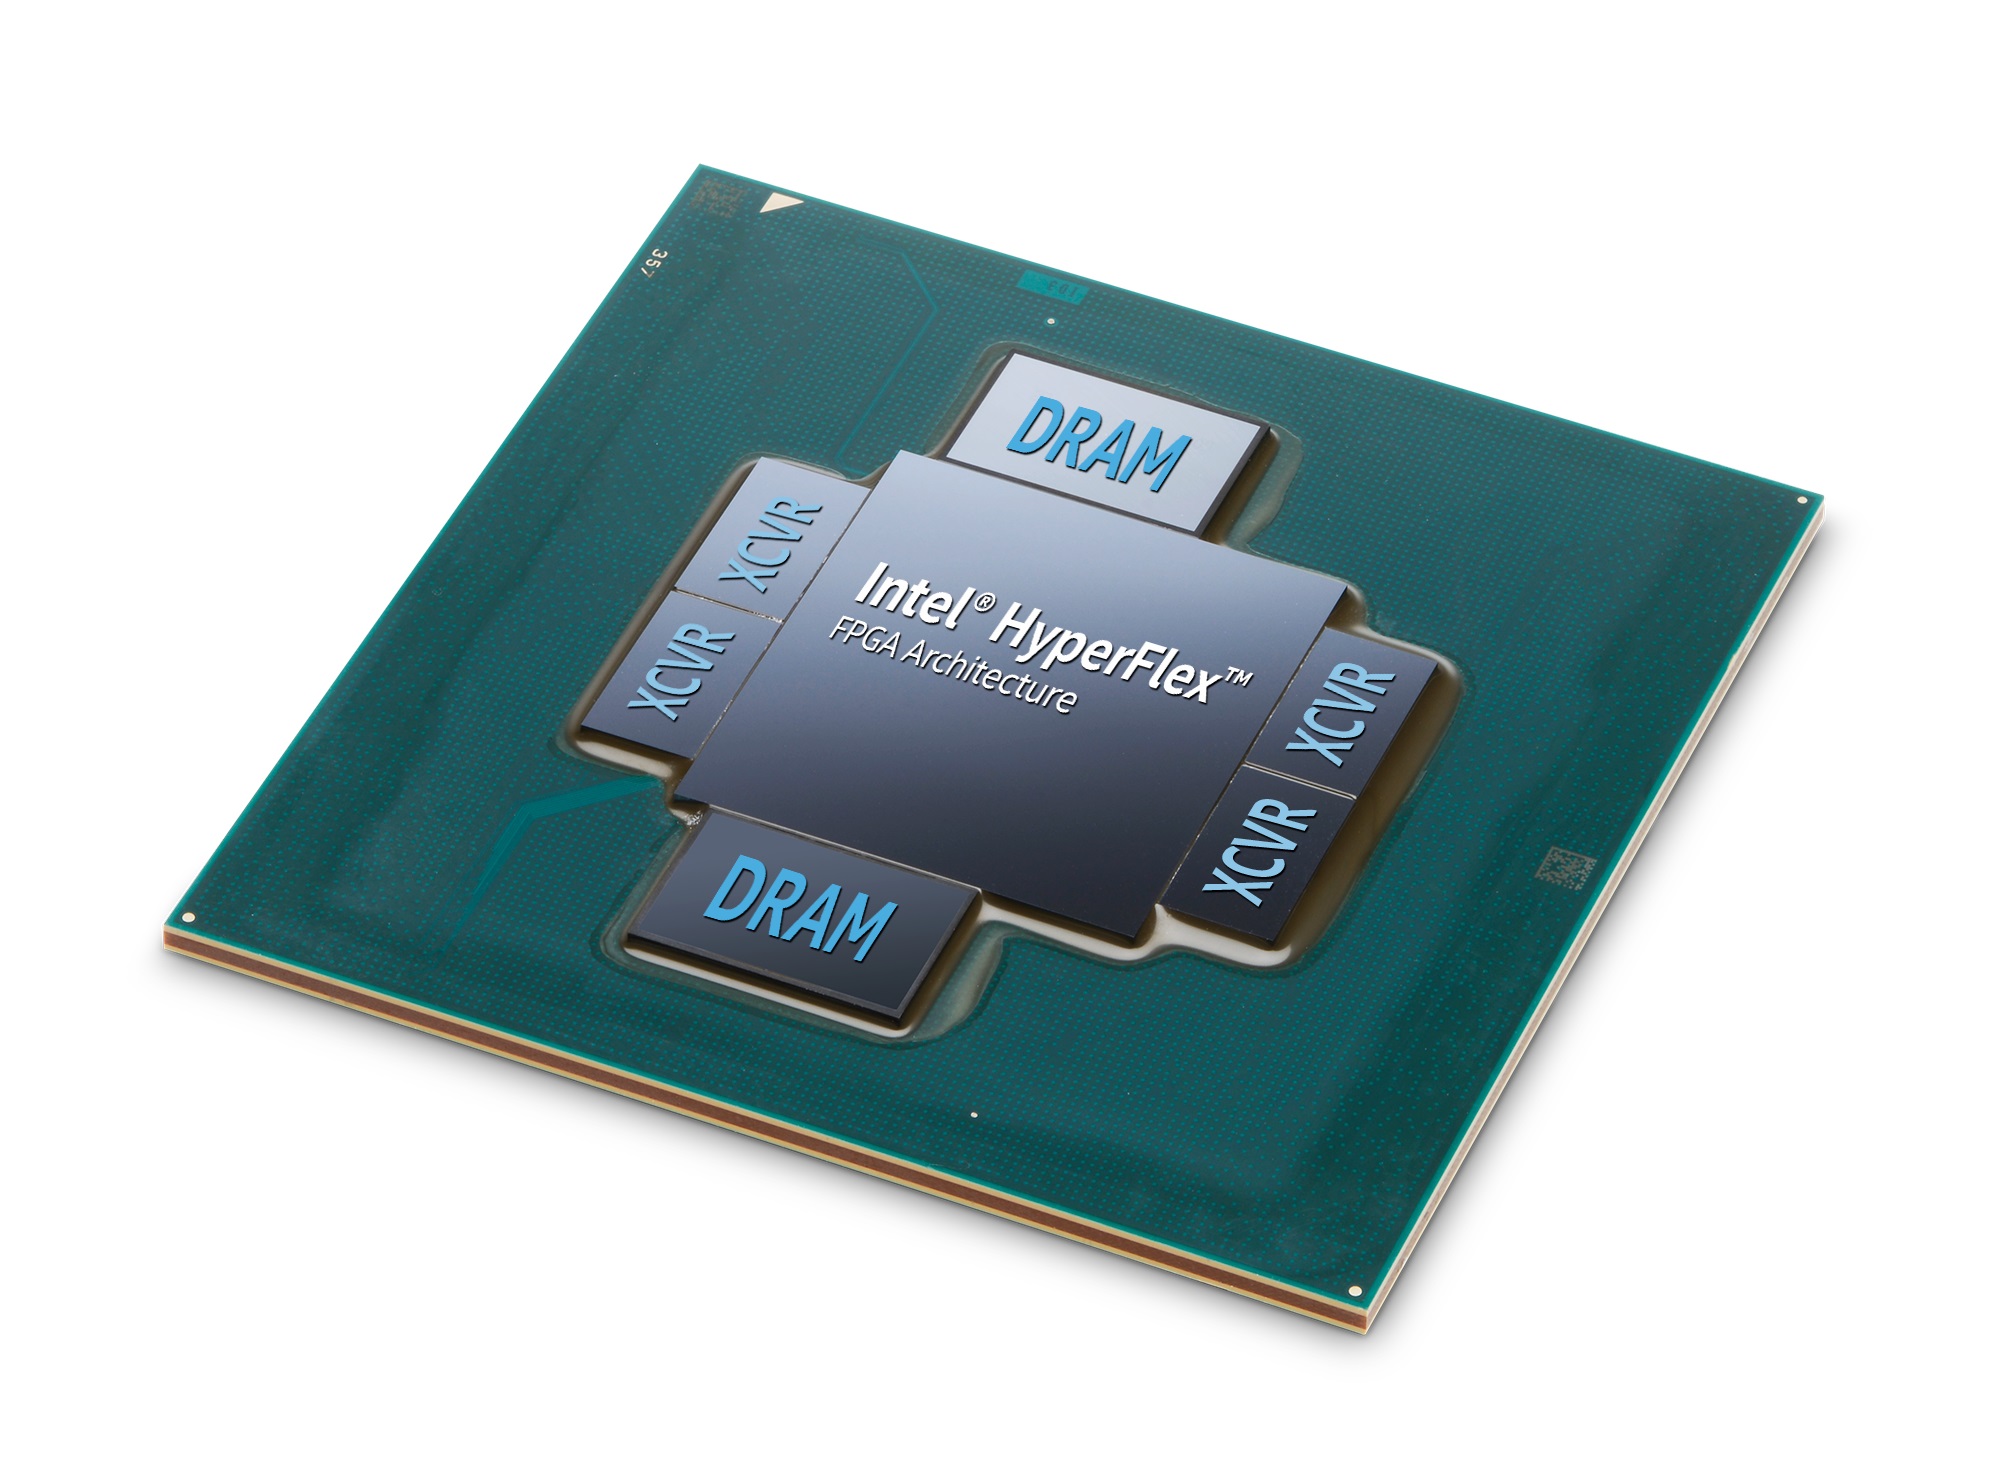 The Intel® Stratix® 10 MX FPGA is the industry’s first field programmable gate array (FPGA) with integrated High Bandwidth Memory DRAM (HBM2). By integrating the FPGA and the HBM2, Intel Stratix 10 MX FPGAs offer up to 10 times memory bandwidth compared to standalone DDR memory solutions. (Credit: Intel Corporation)